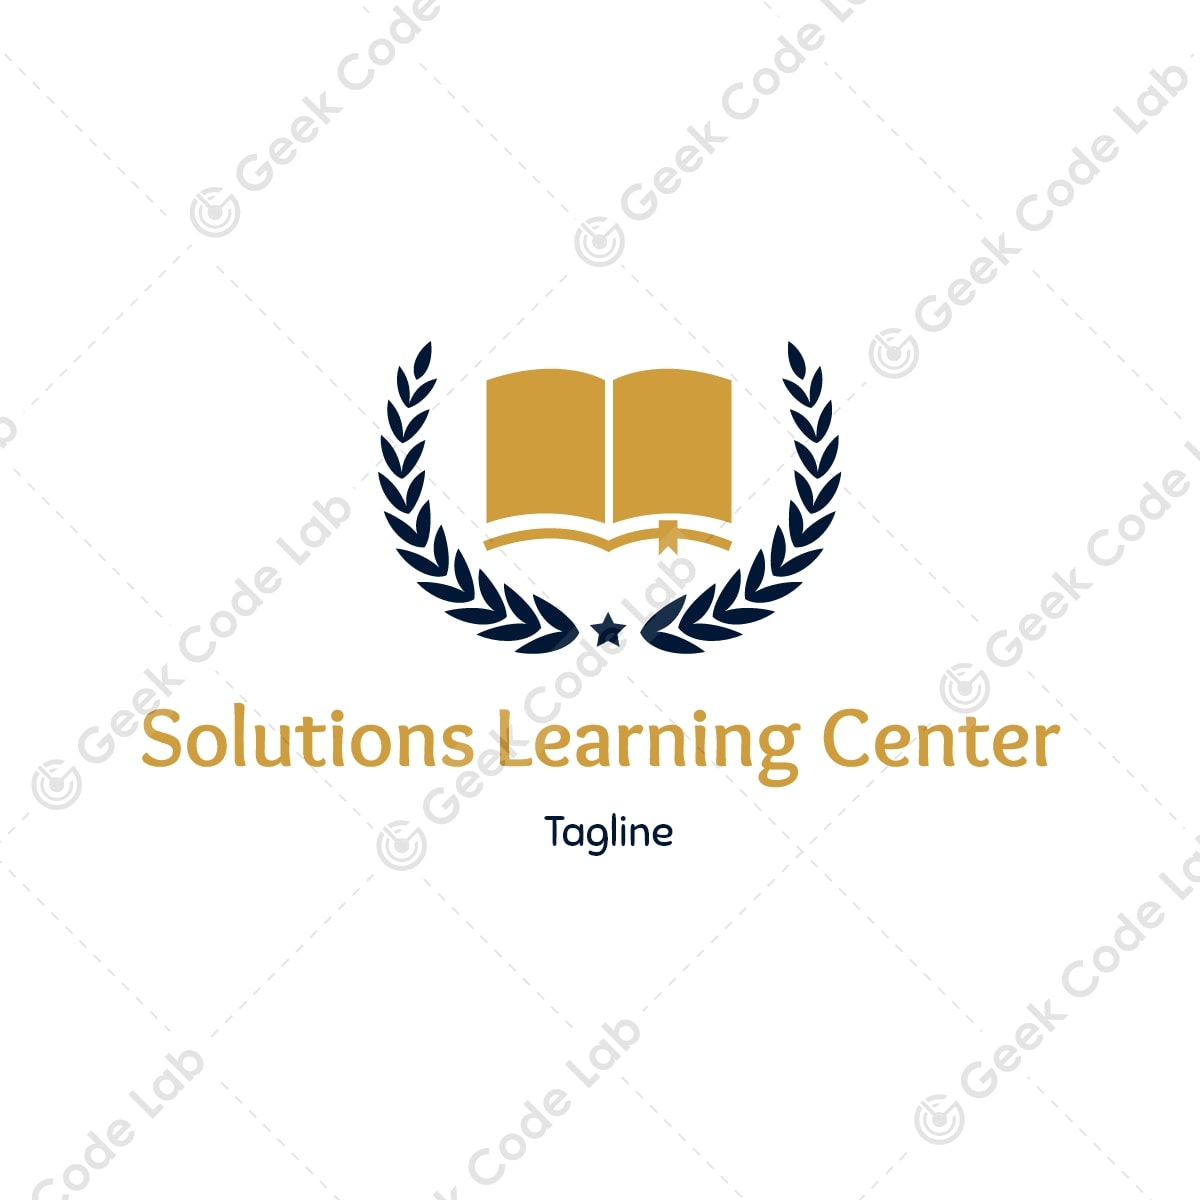 Solutions Learning Center